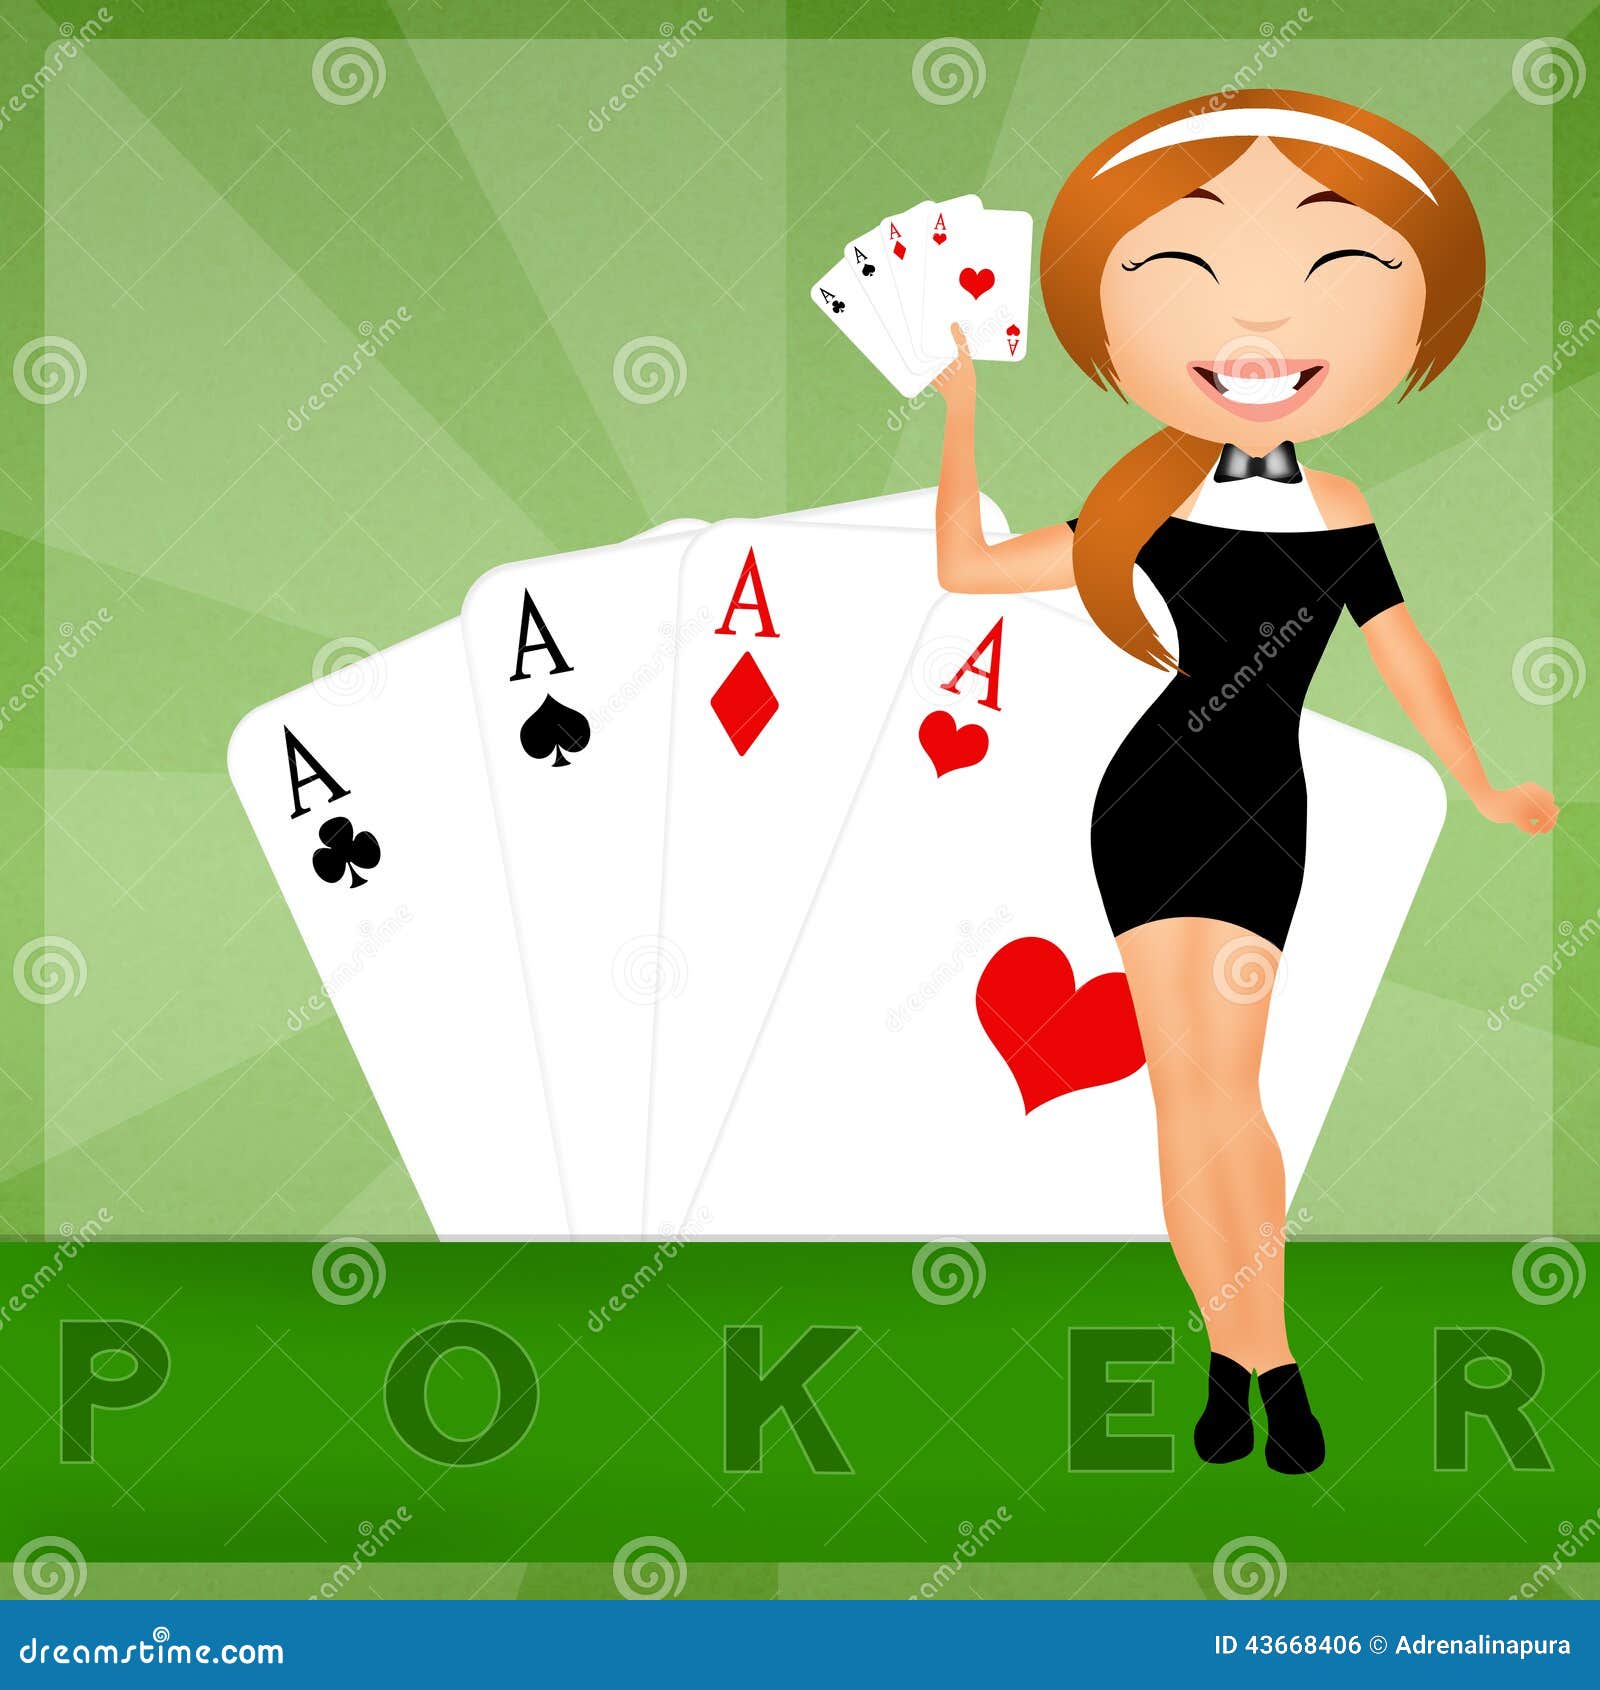 Girl with poker of aces stock illustration. Illustration of dice - 43668406